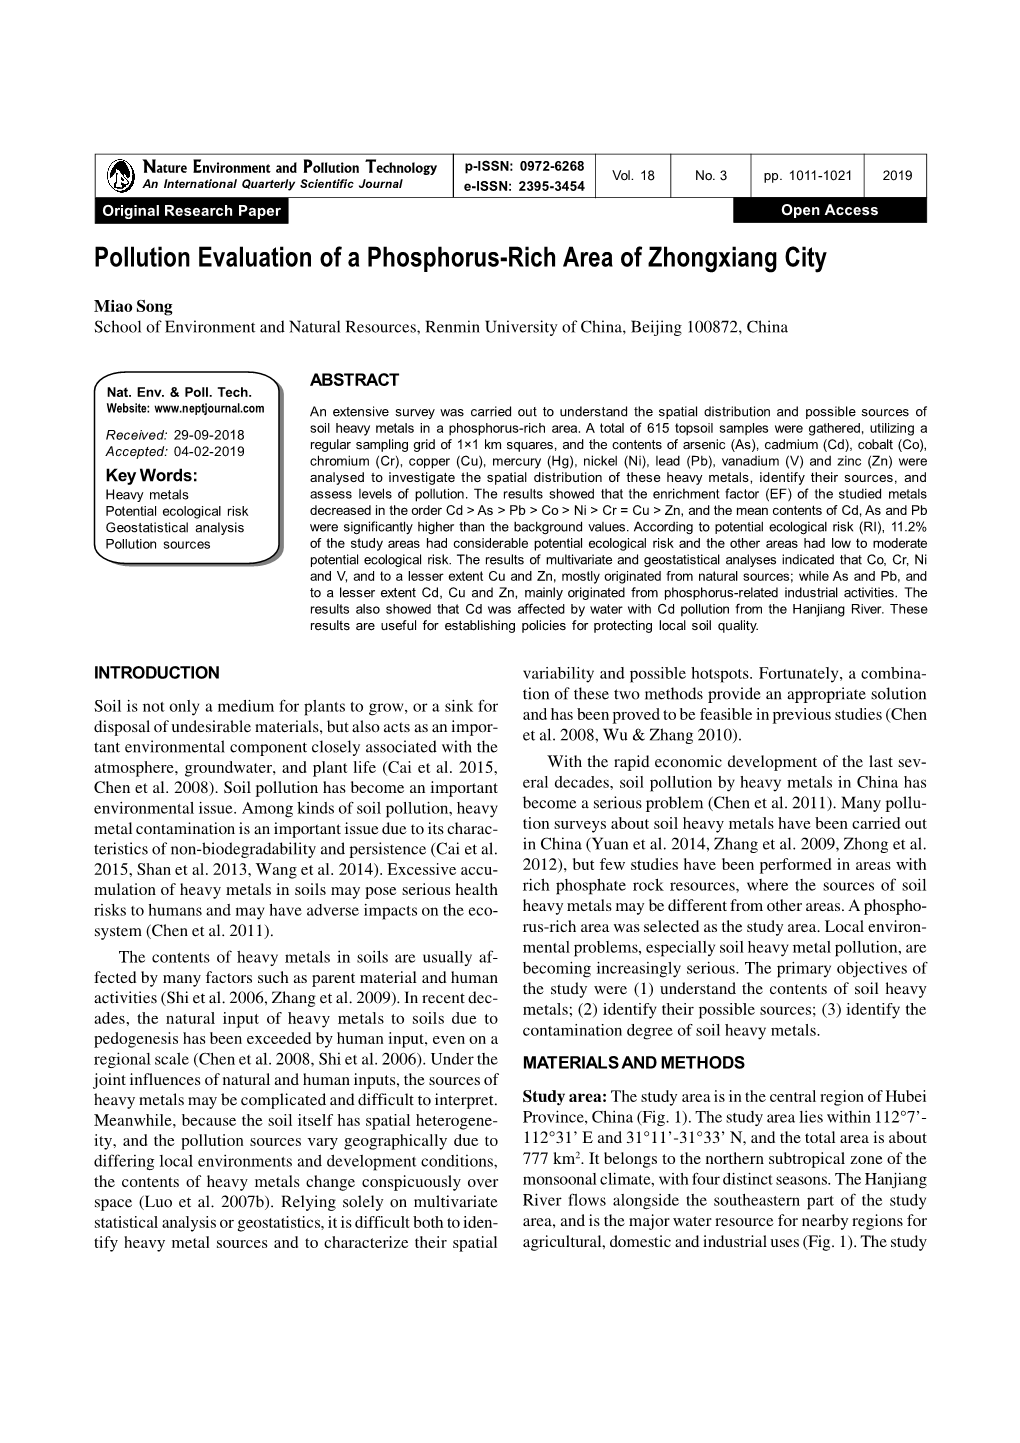 Pollution Evaluation of a Phosphorus-Rich Area of Zhongxiang City